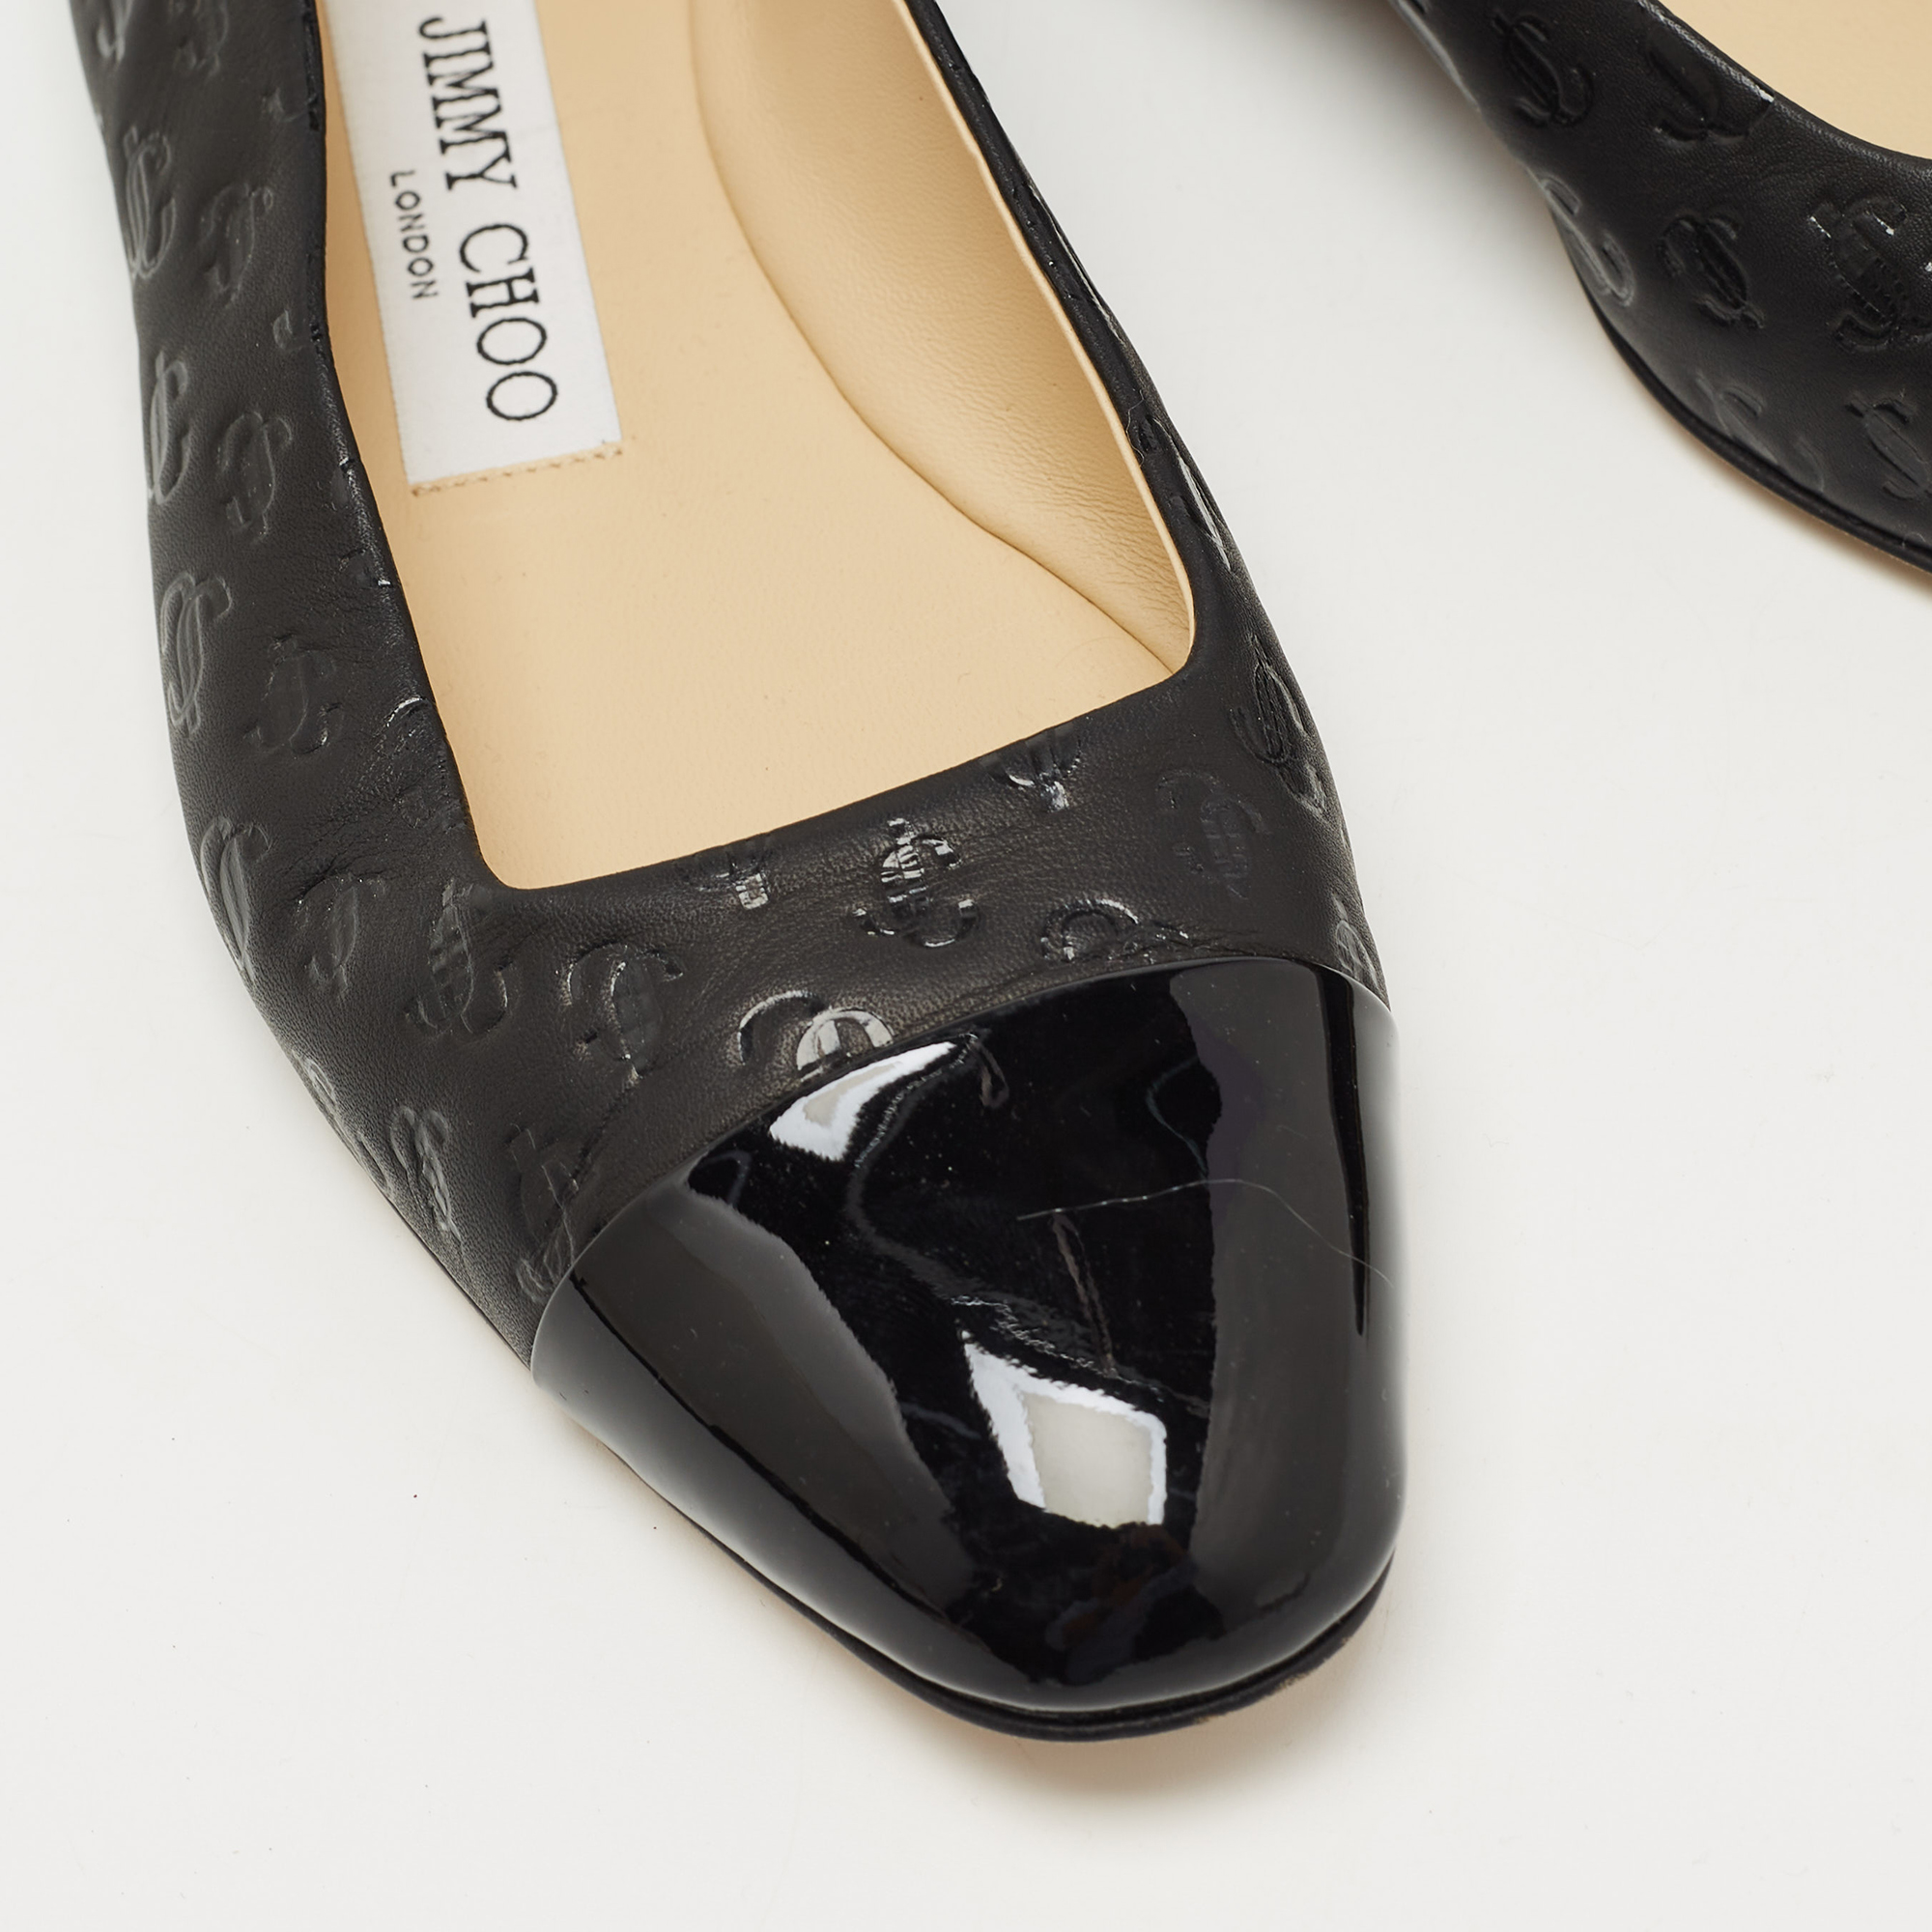 Jimmy Choo Black Patent And Leather Ballet Flats Size 36